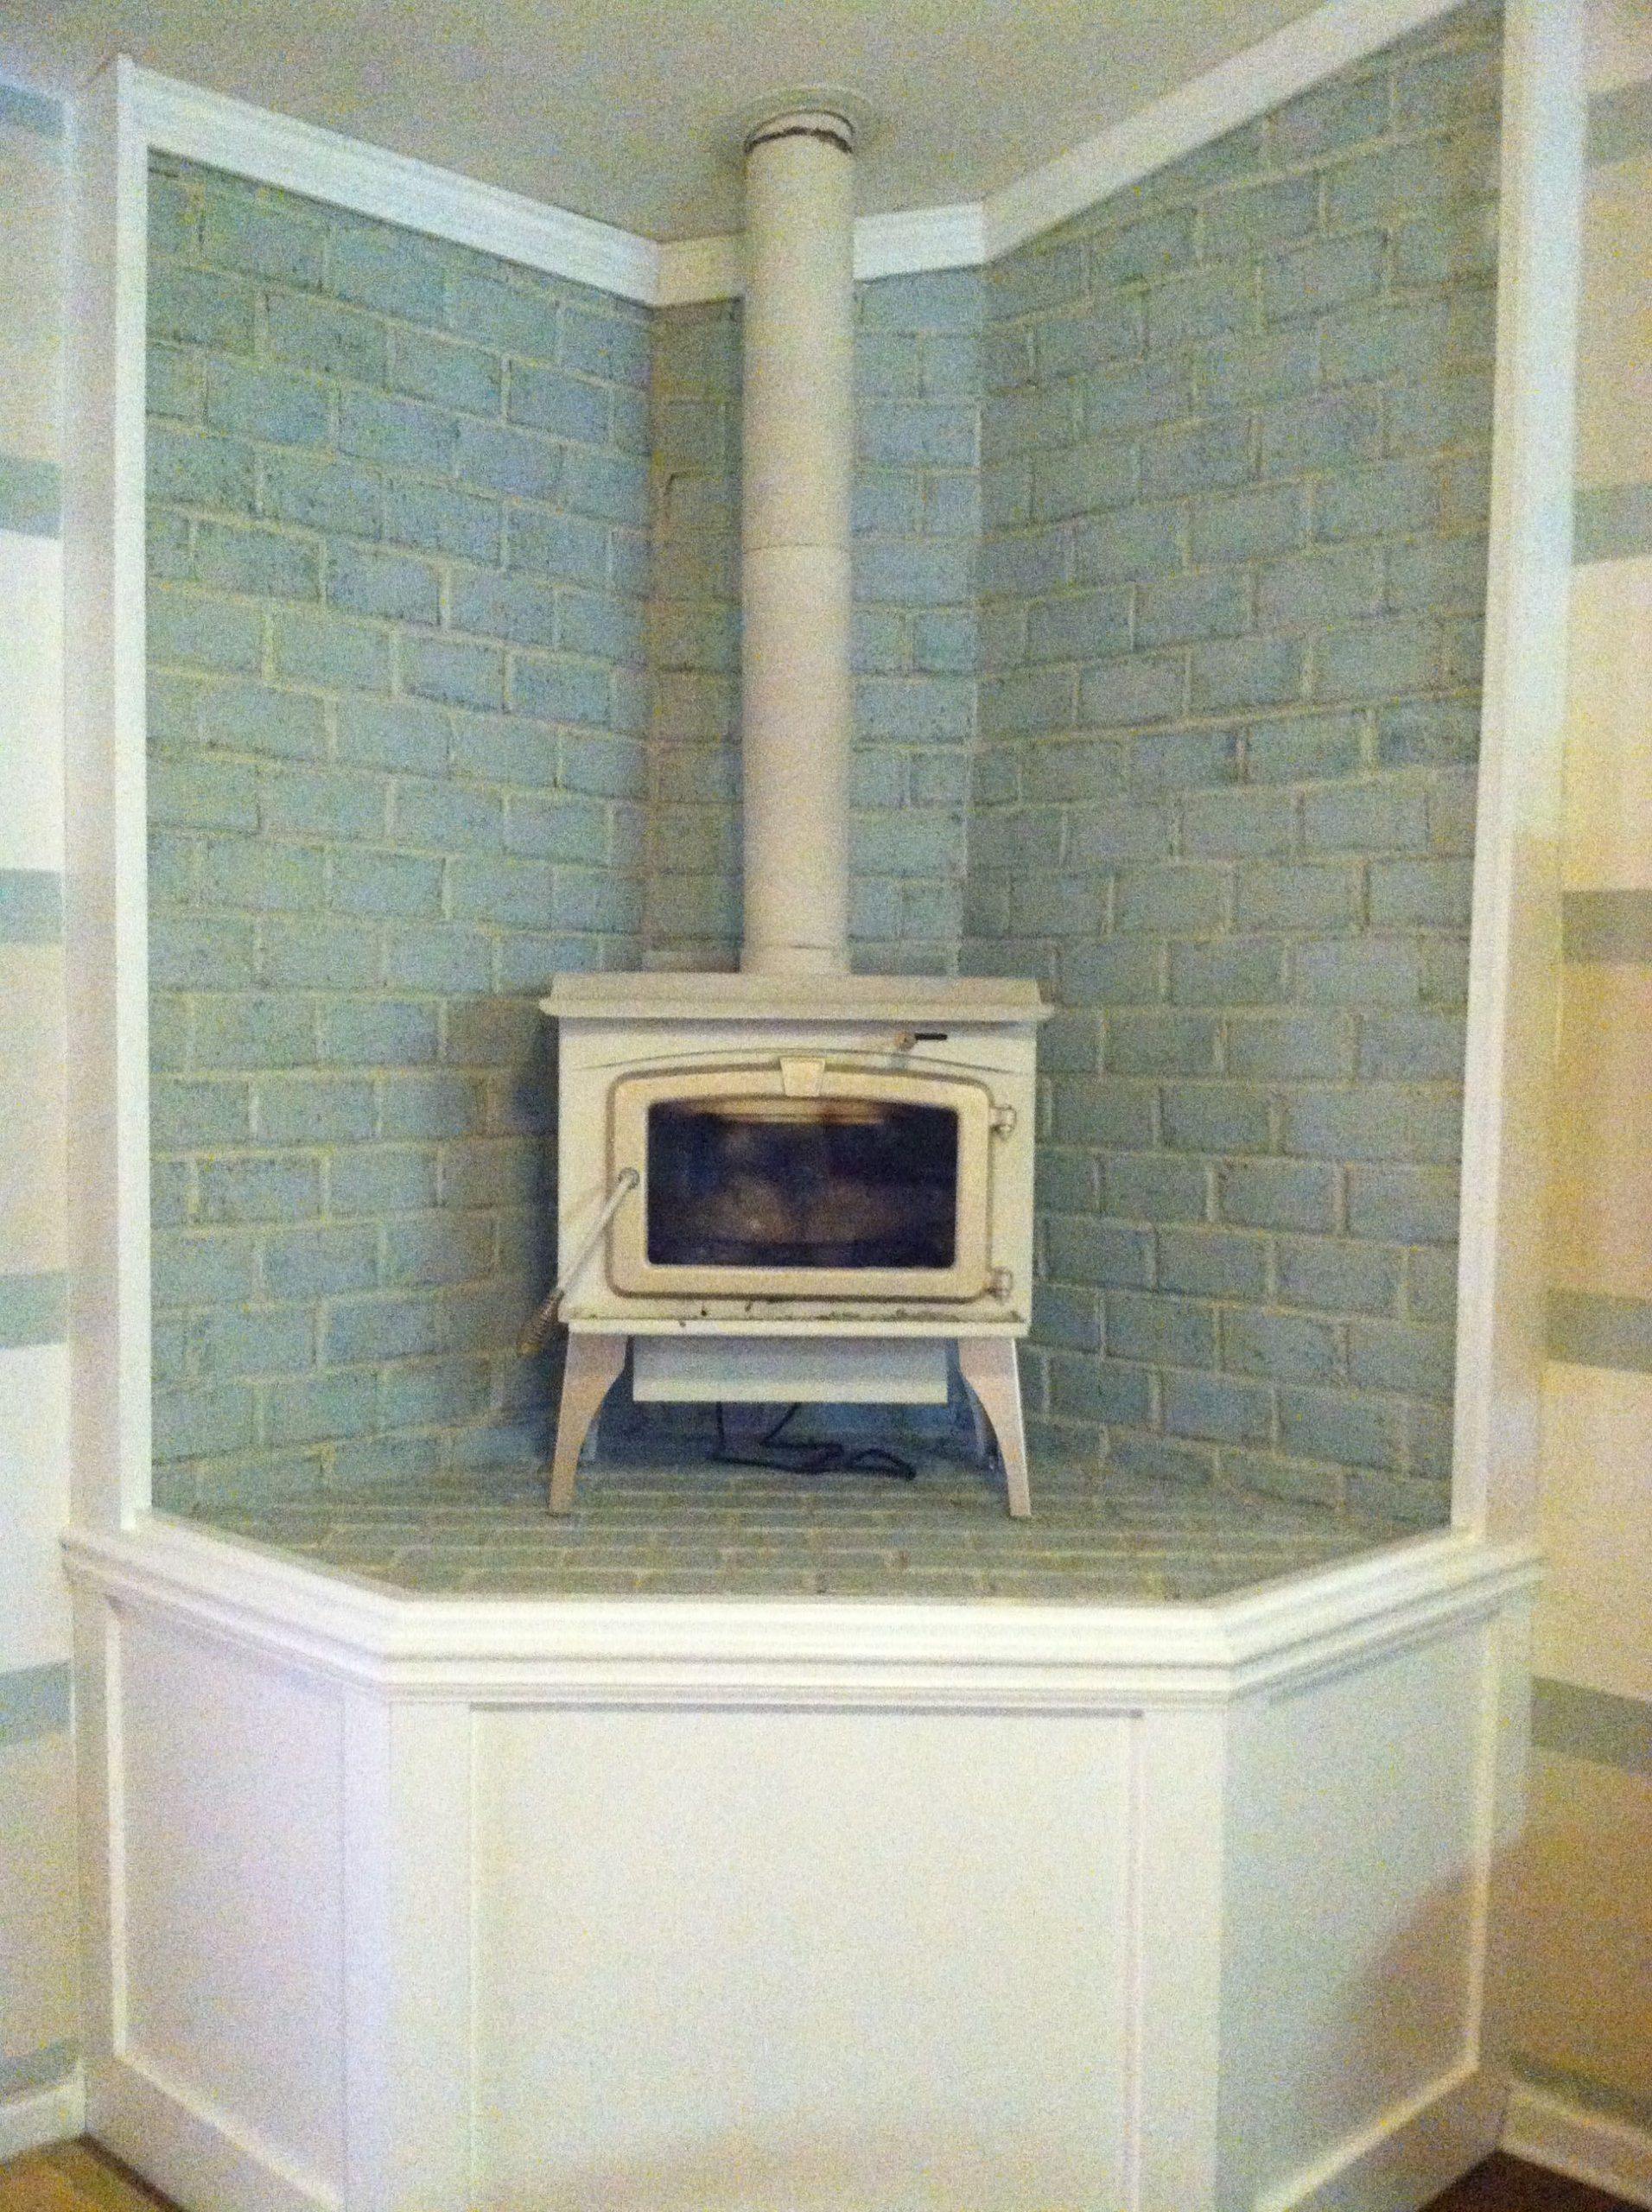 Wood Burning Fireplace Inserts Lowes Best Of Lowes Wood Burning Stove Painted and Built In No More Gas